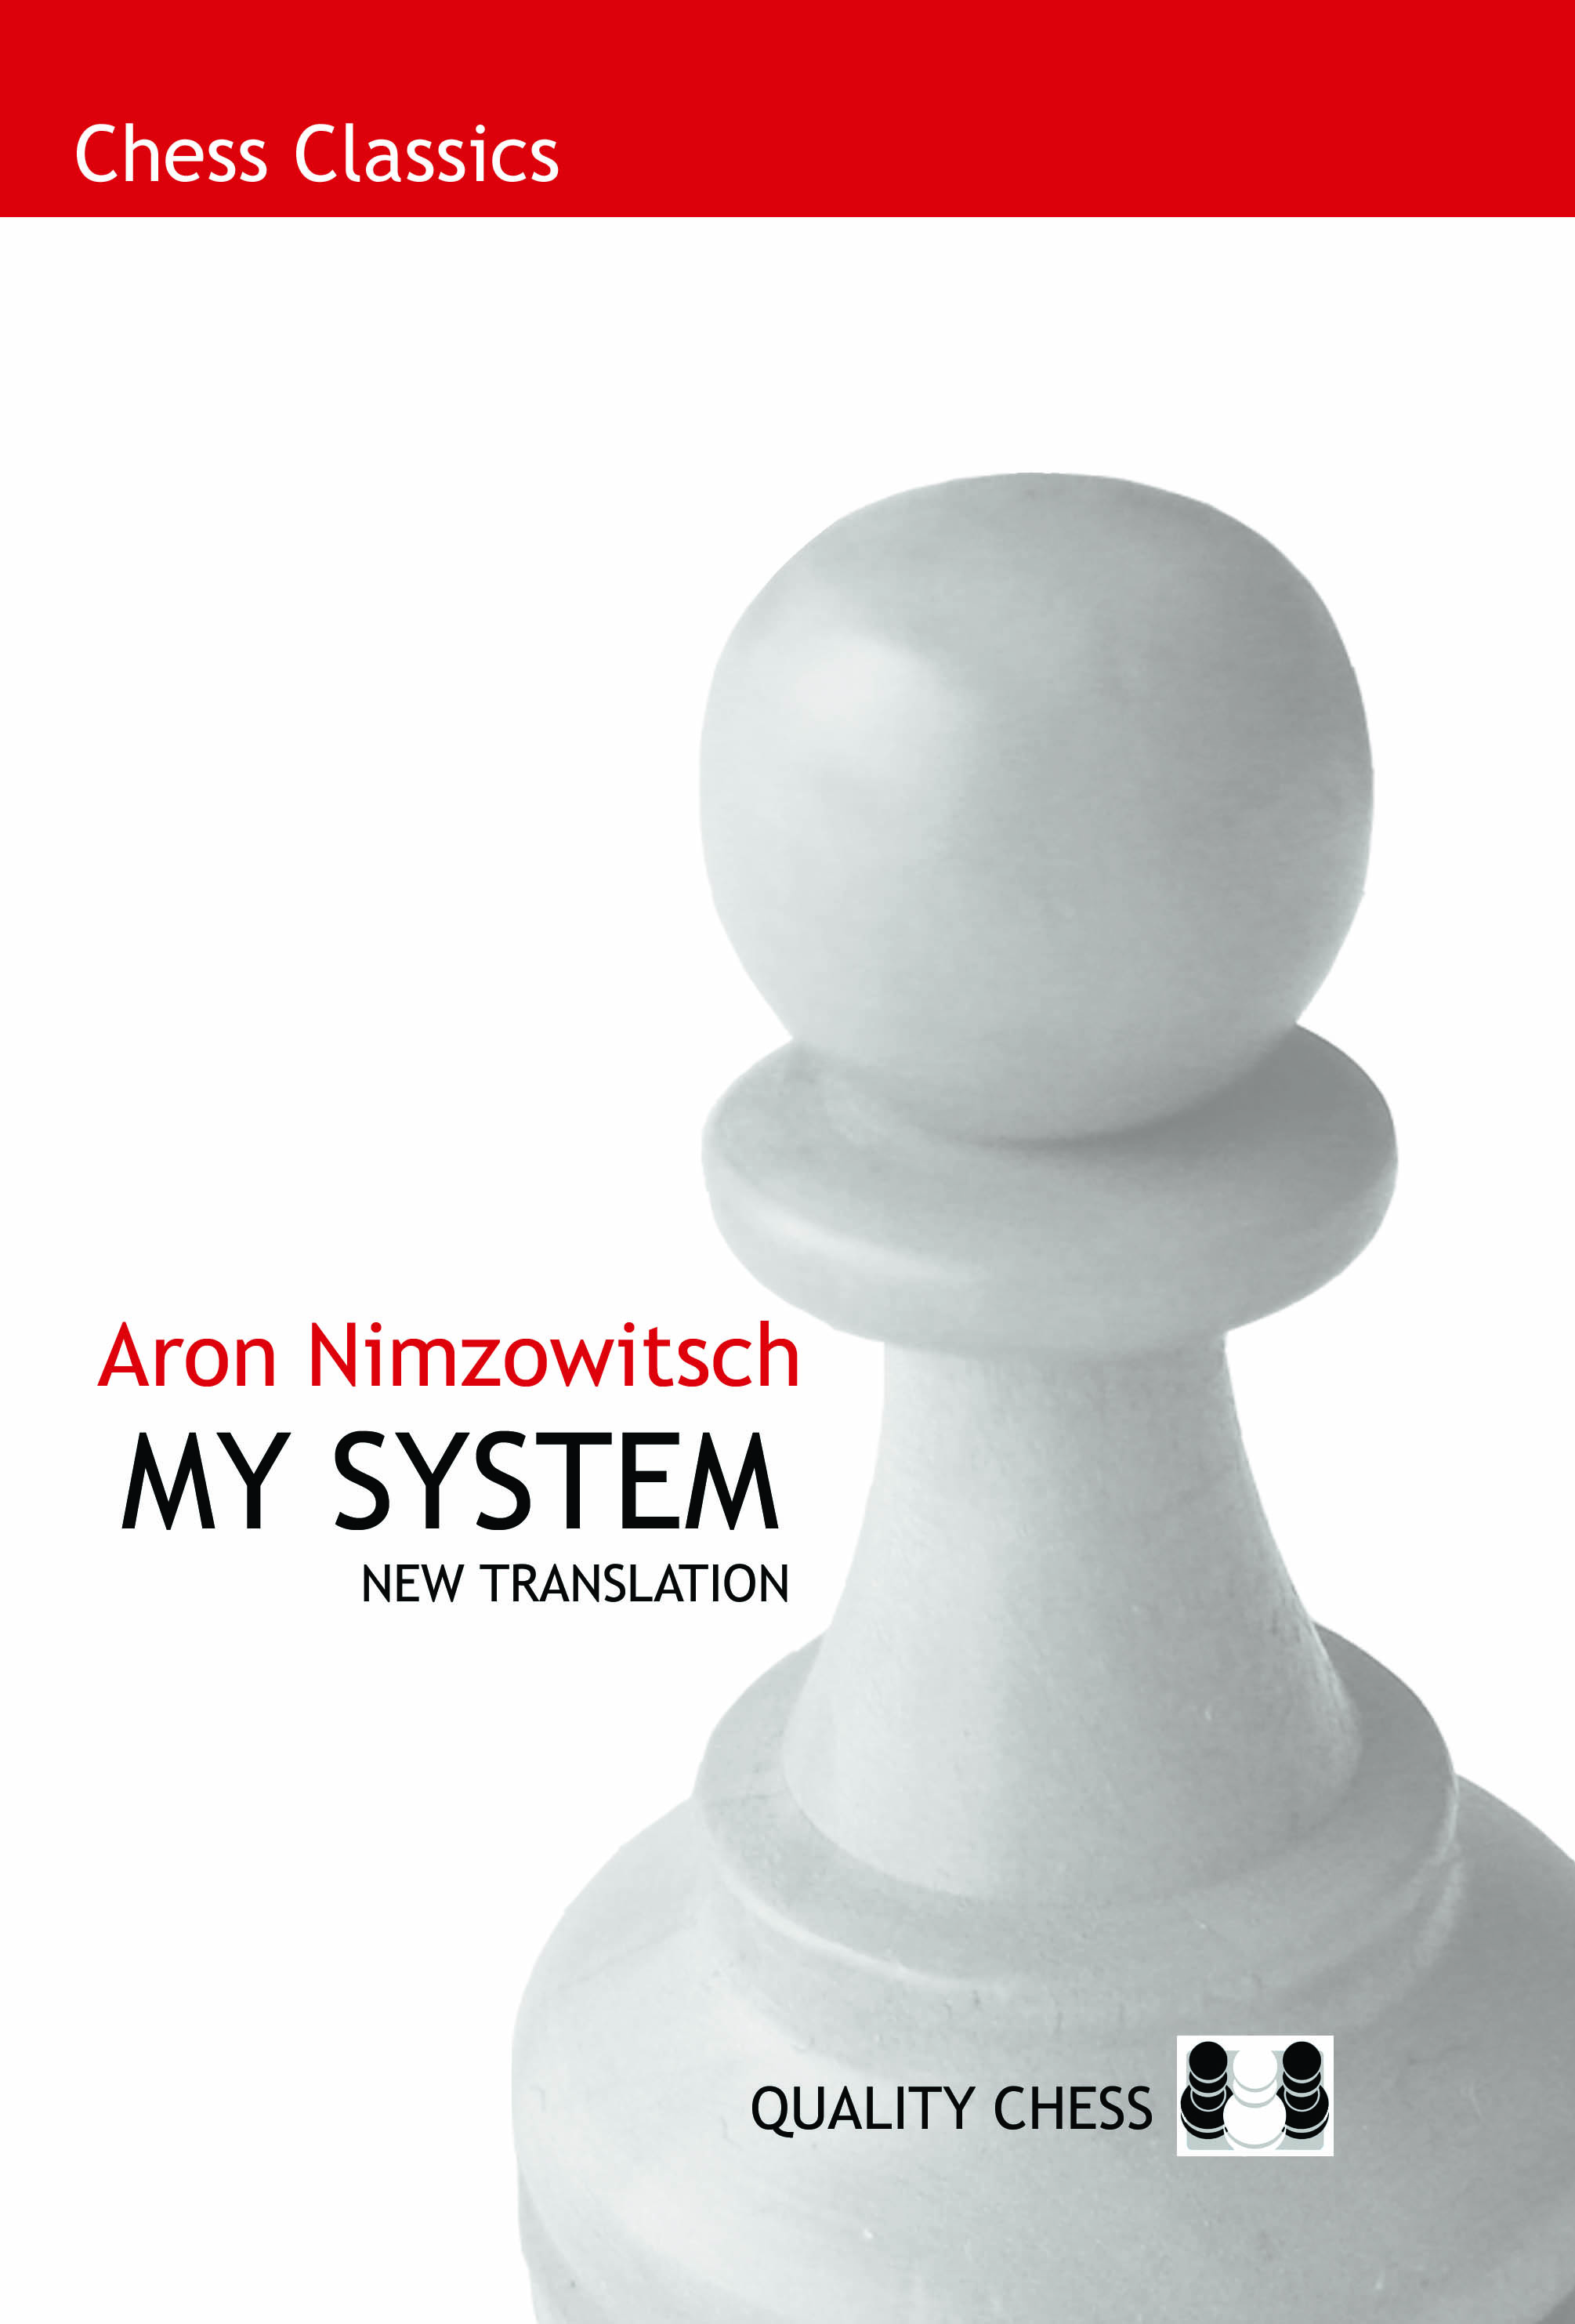 Improve Your Chess Game with Aron Nimzowitsch's My System — Eightify